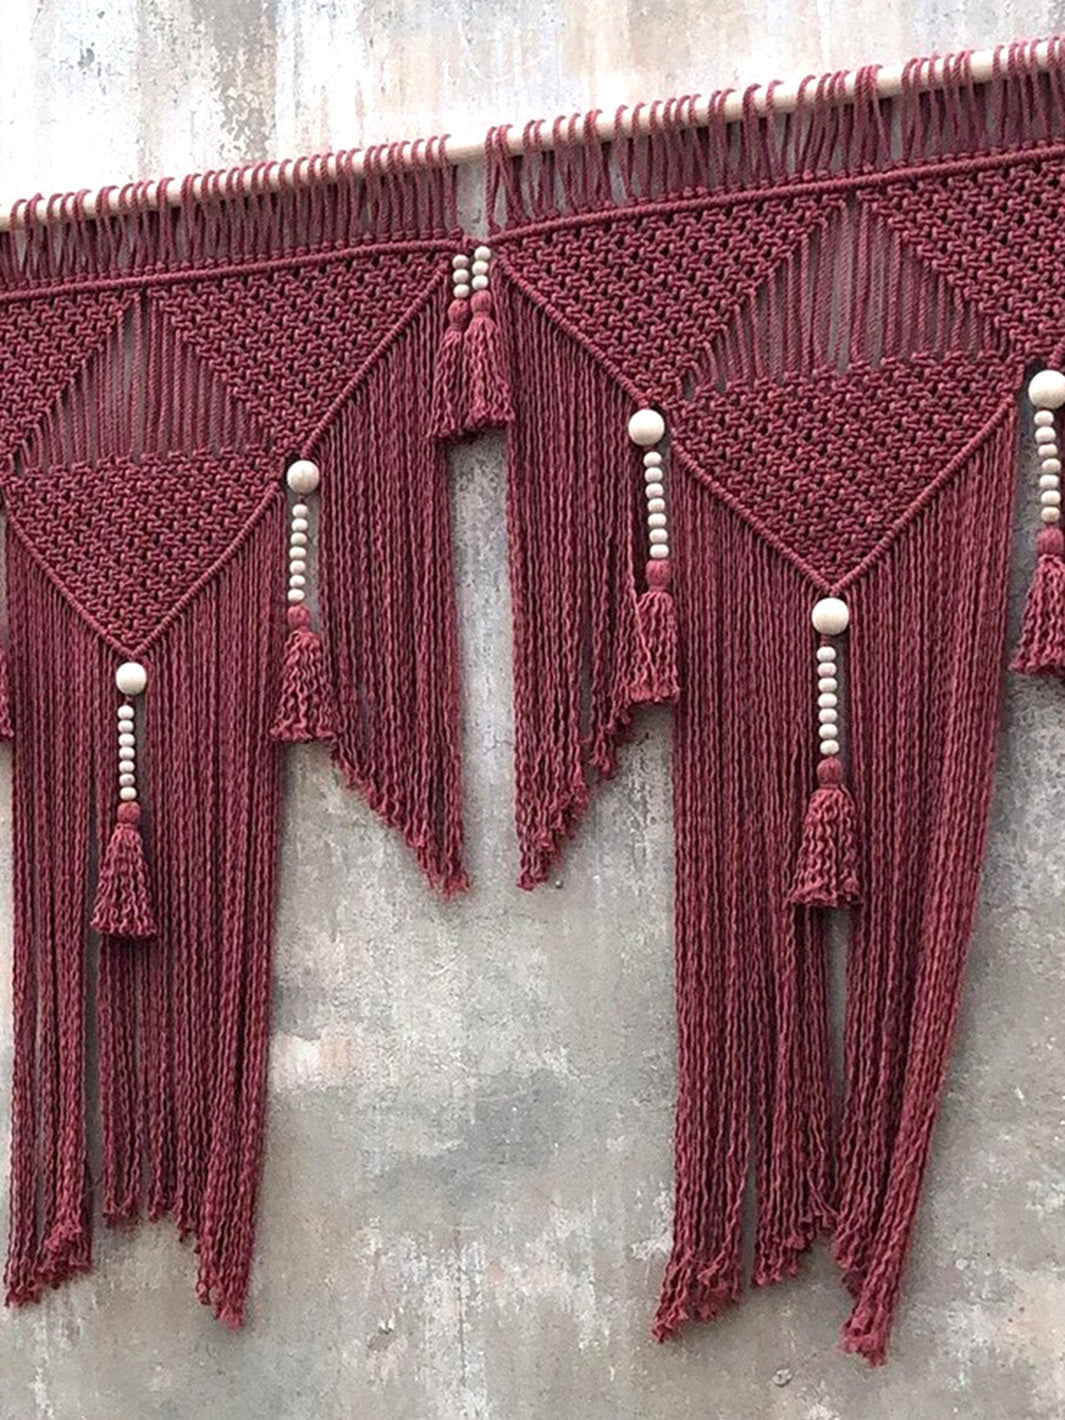 Handcrafted Terracotta Macrame Boho Hanging Woven Wall Decoration WallKnot Curtains & Drapes WKN0145-5